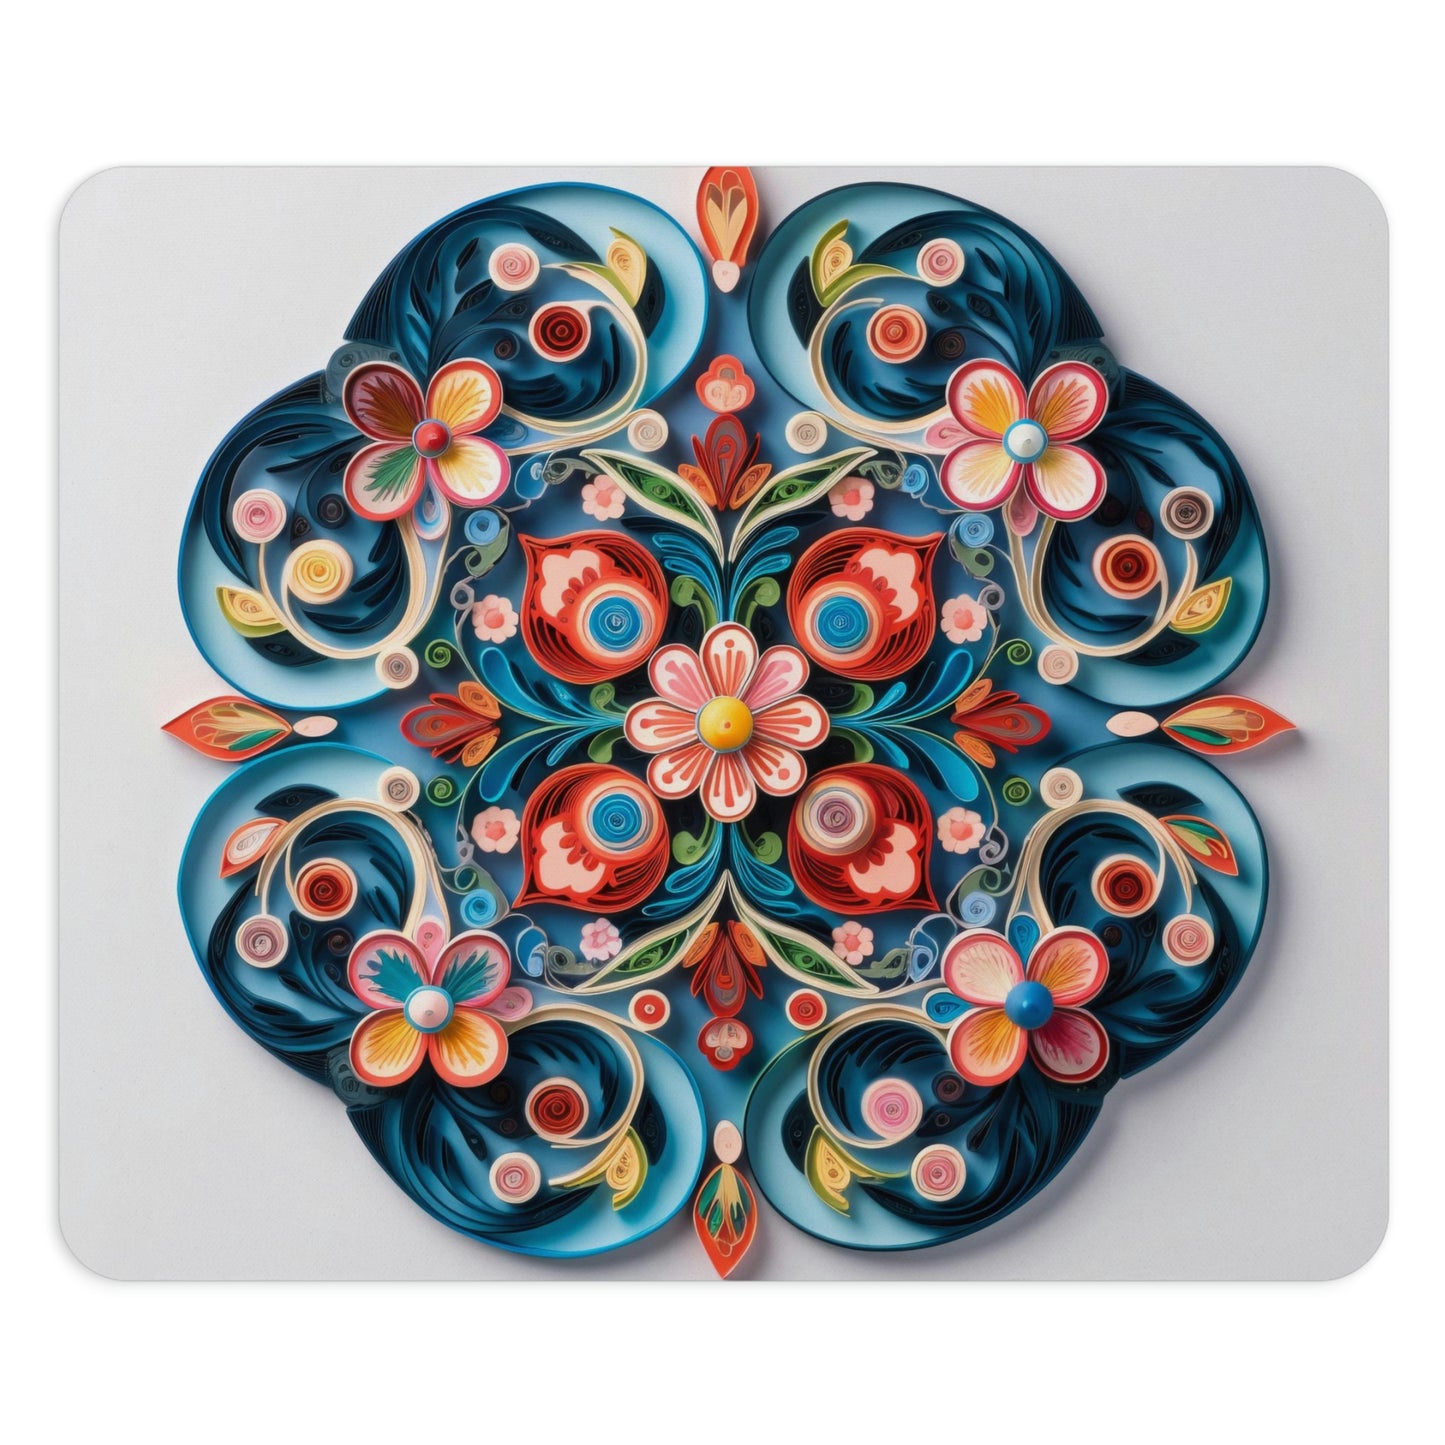 Folk Art Decorative Rosemaling Paper Quilling Mouse Pad (2) 2 Shapes